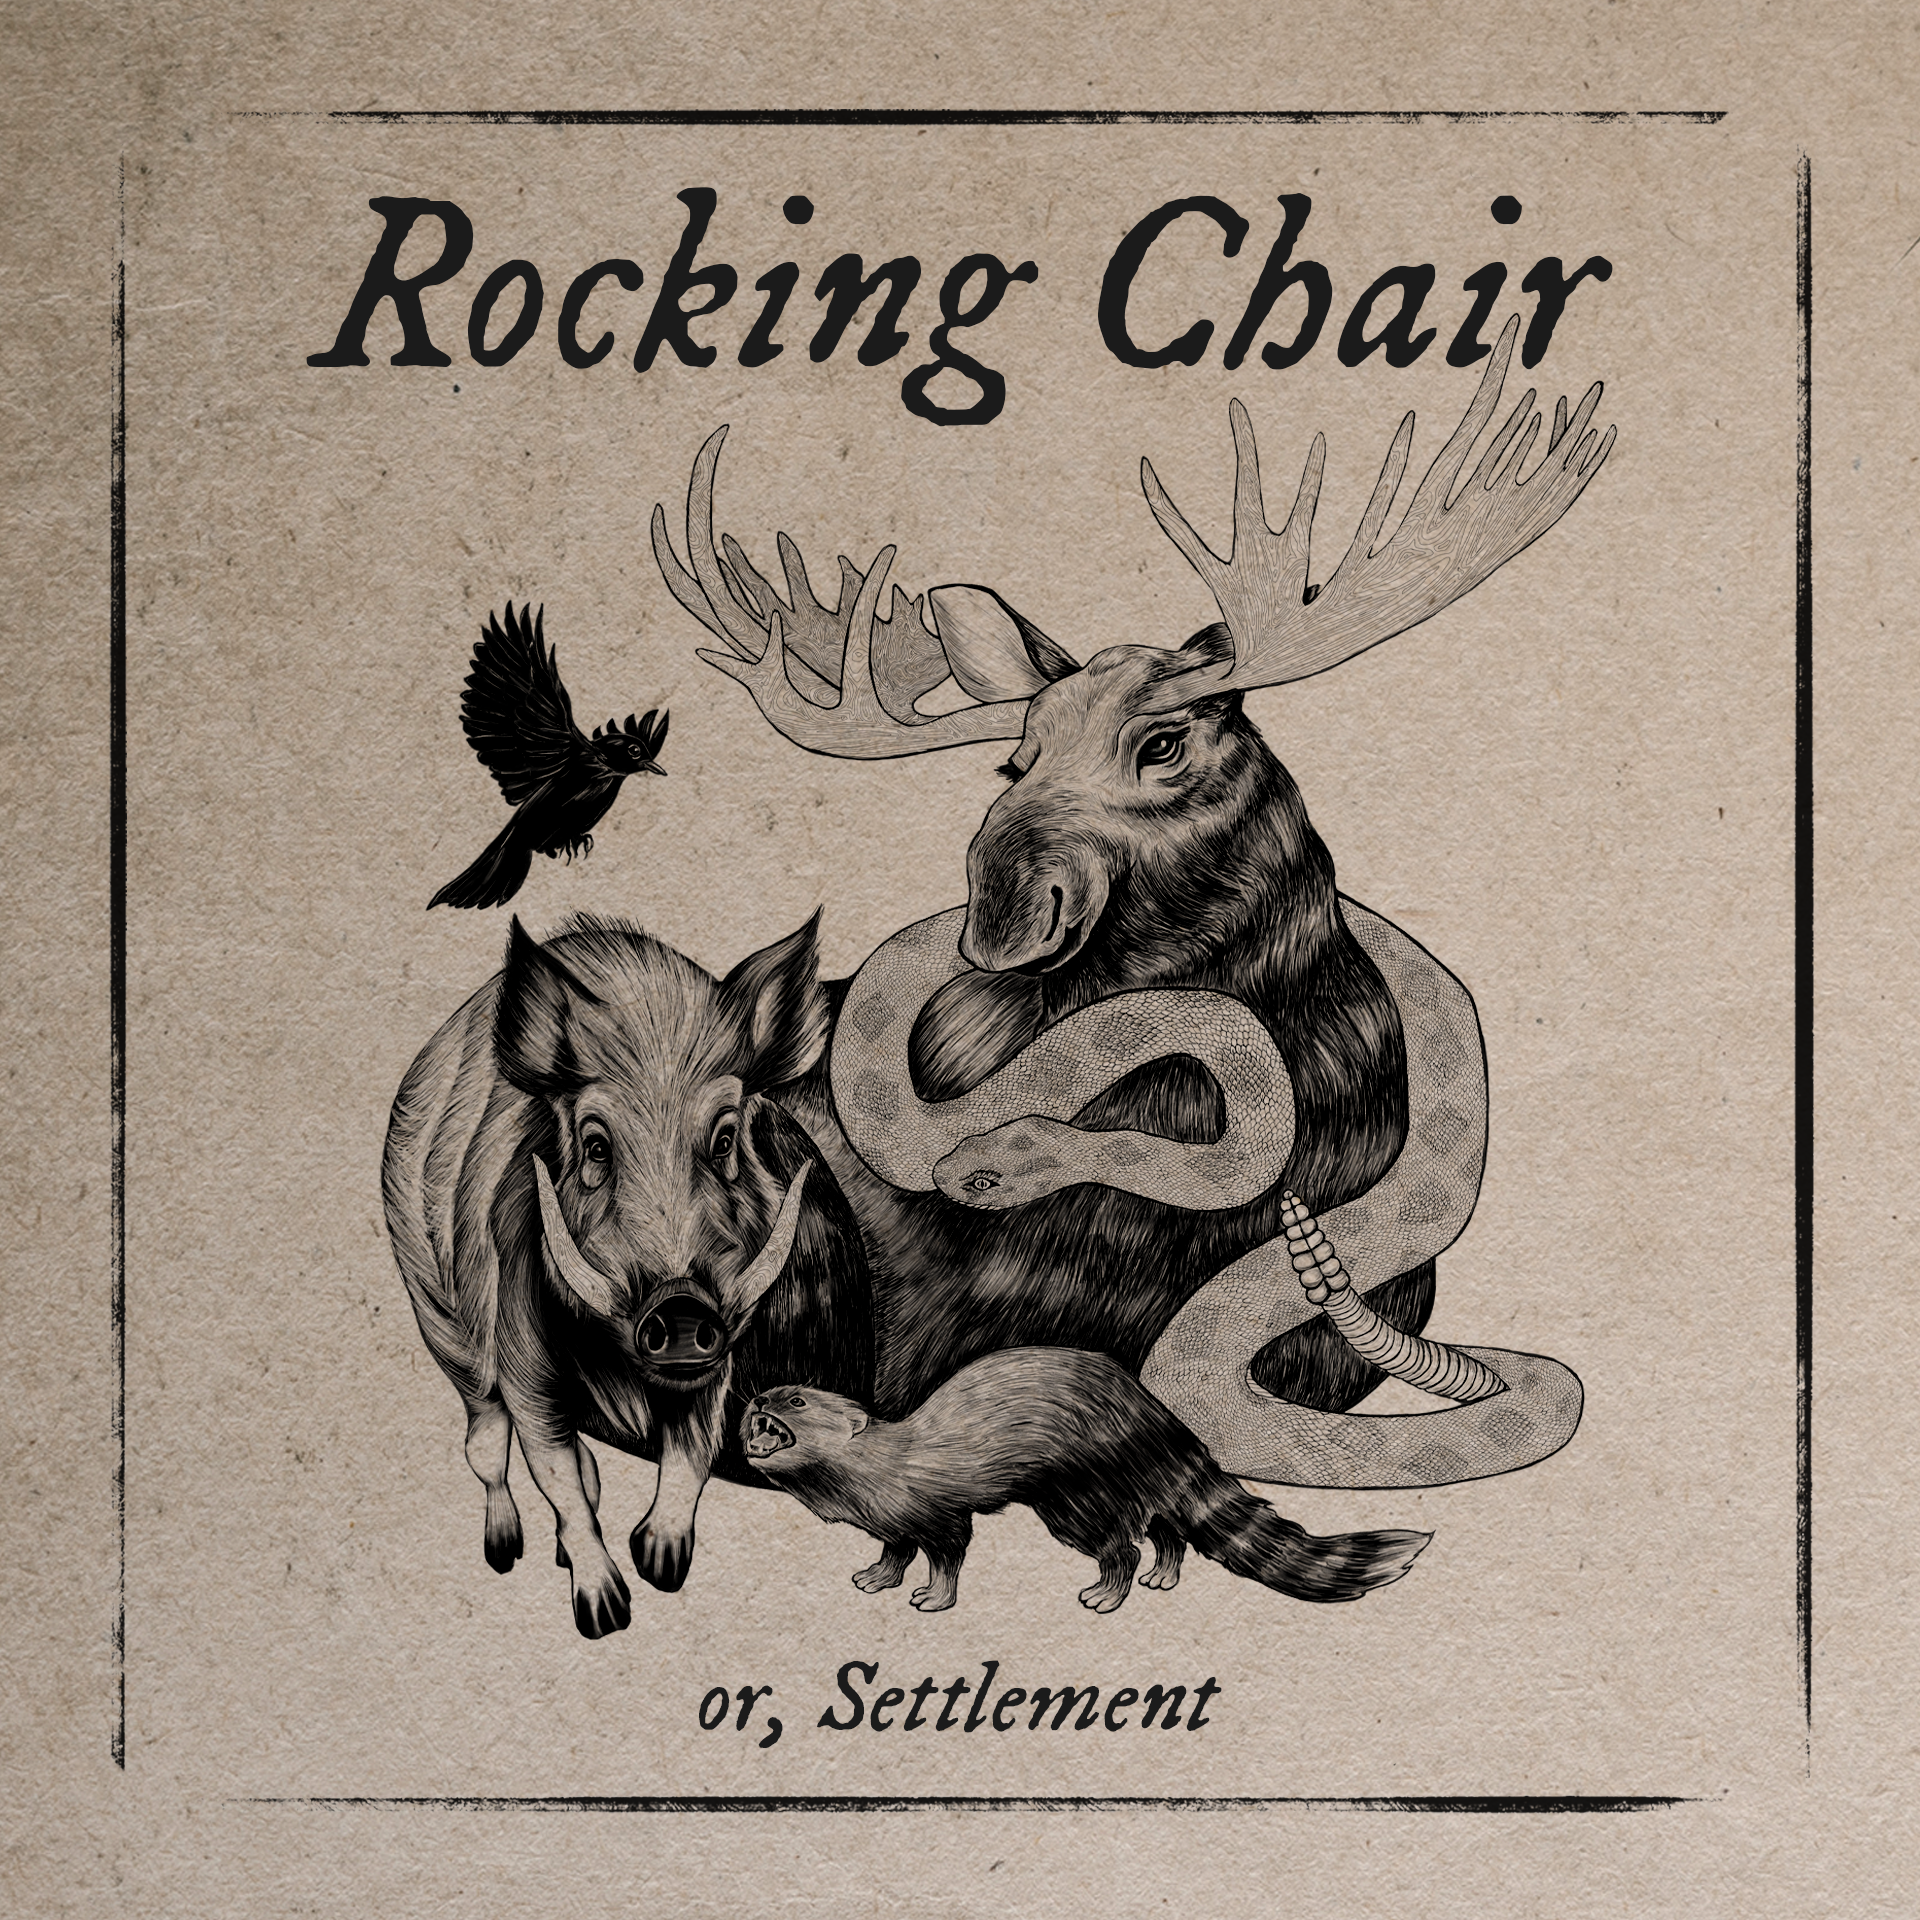 Rocking Chair Cover Art